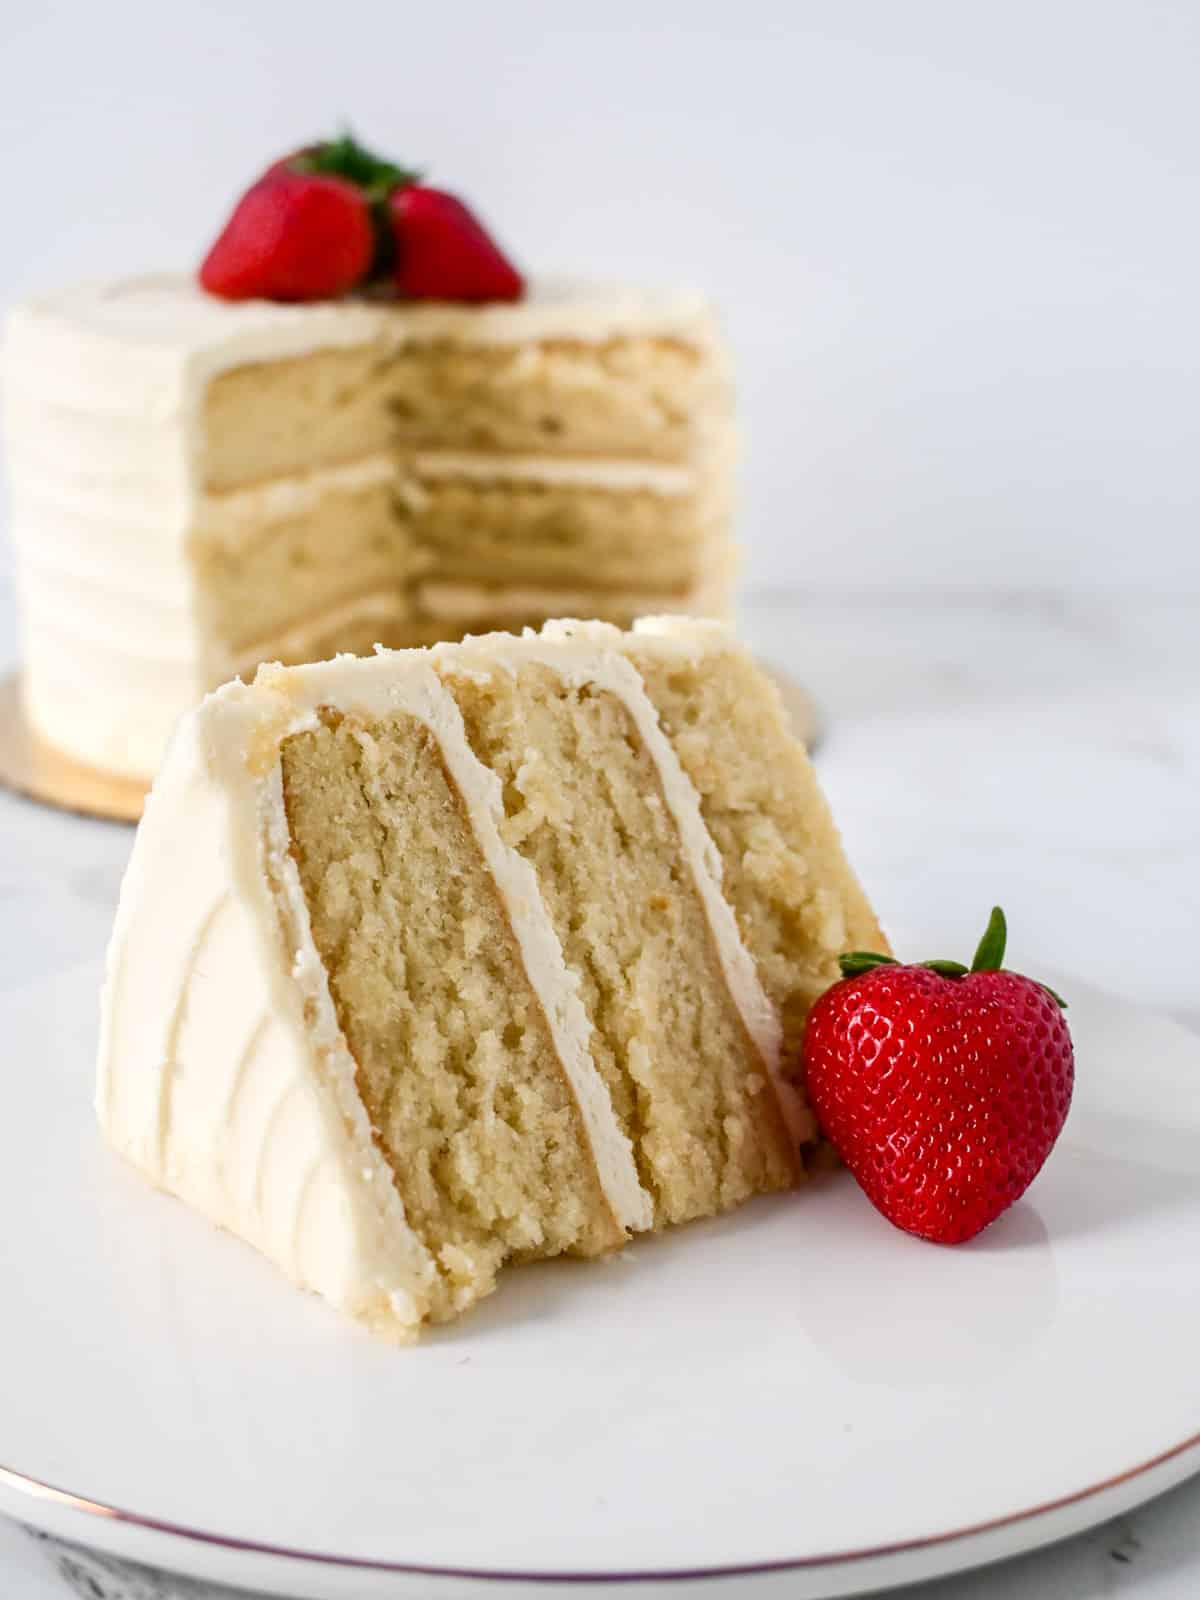 slice of vanilla cake made using the reverse creaming method in front of the layered cake.